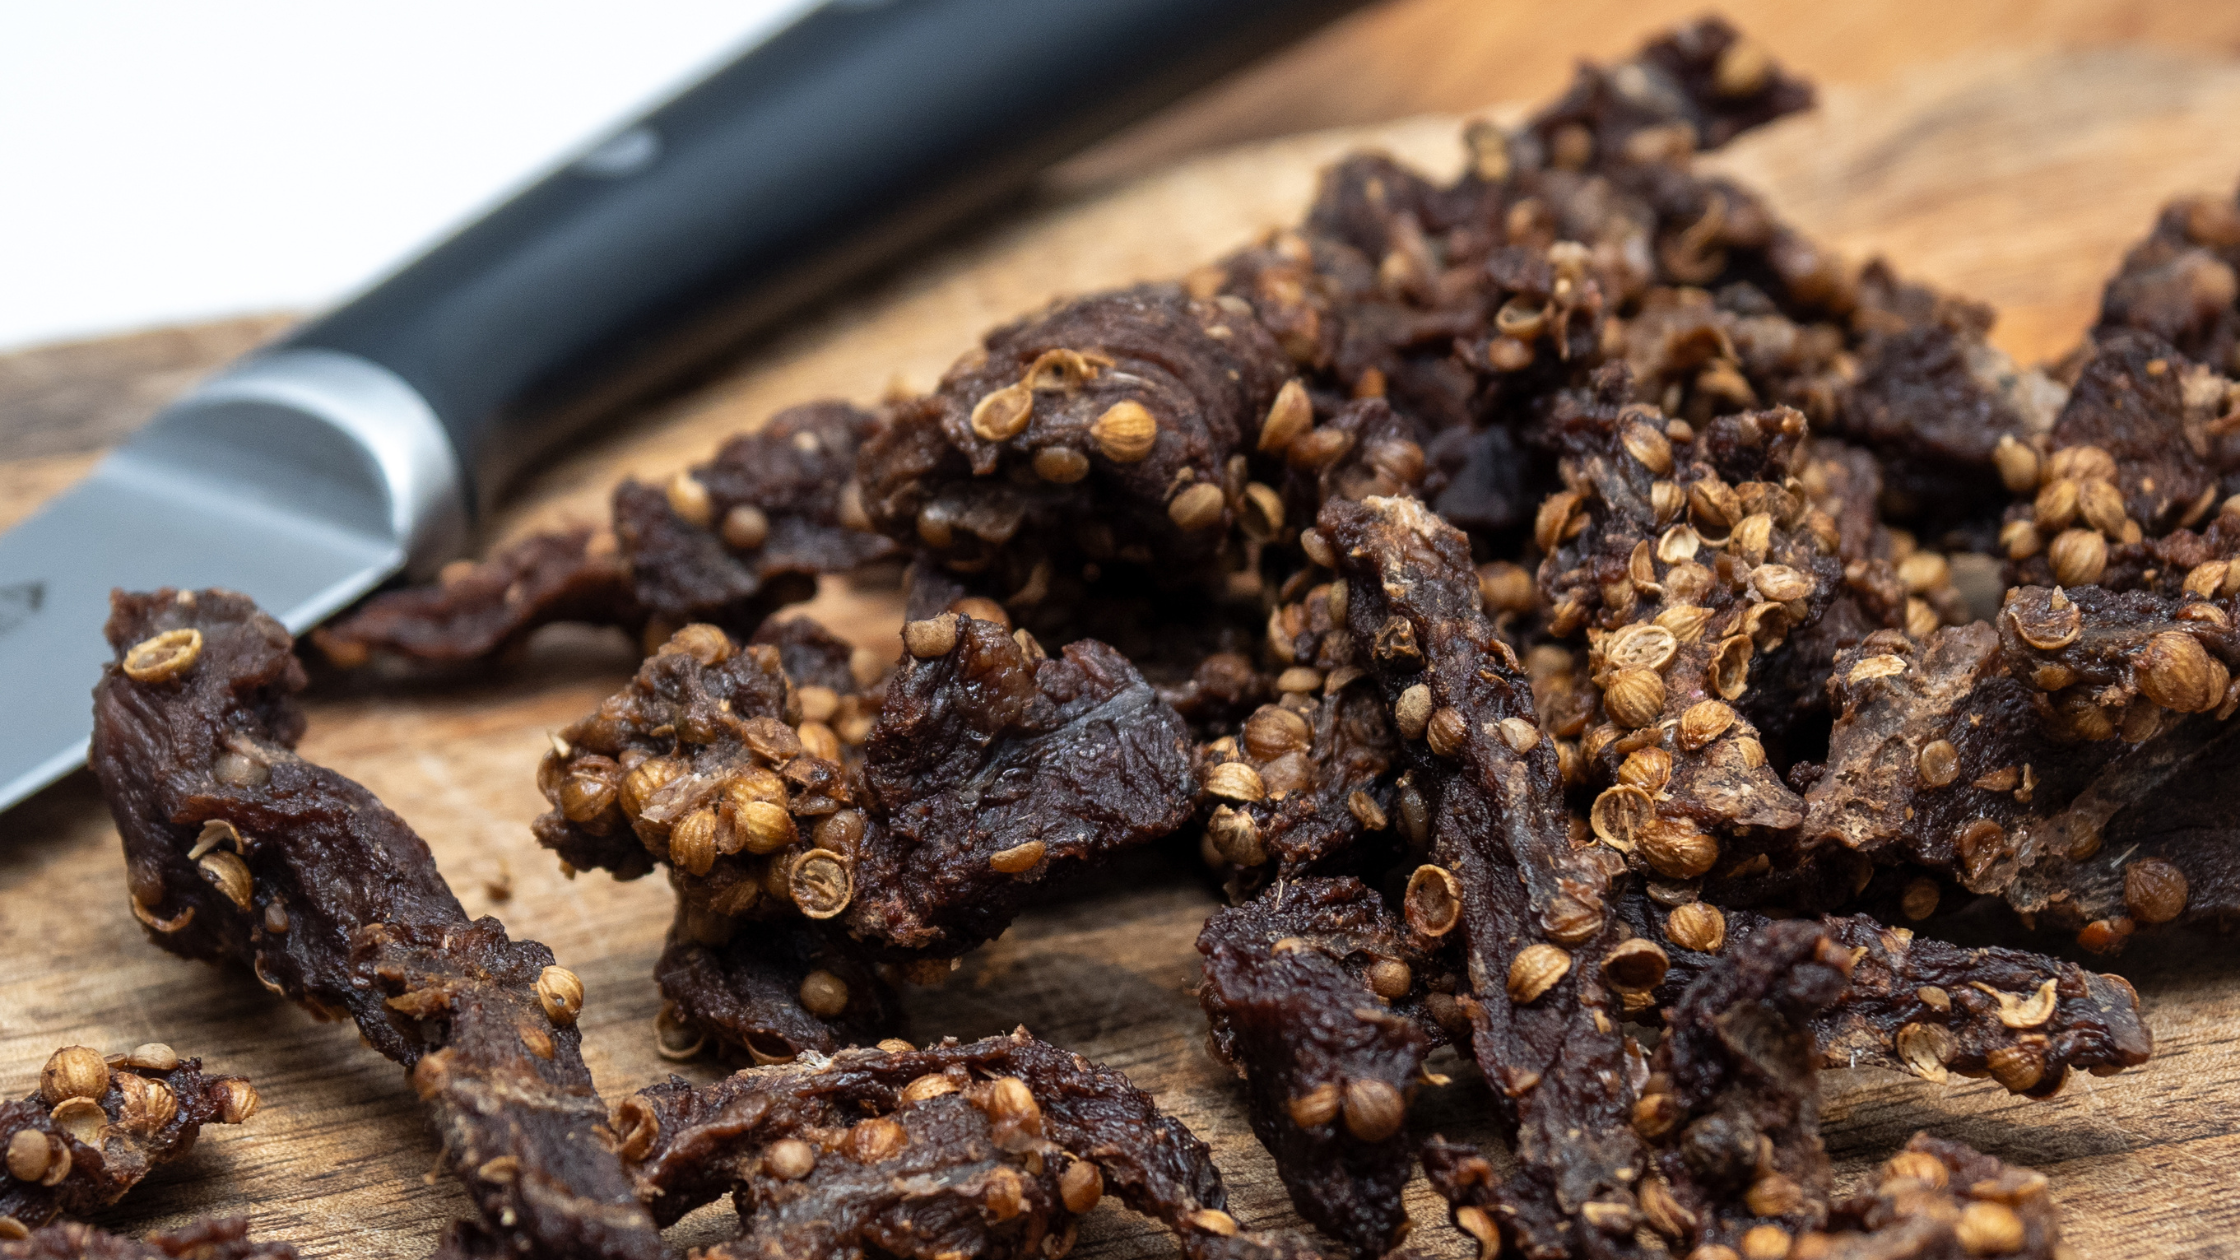 Biltong (South African Dried Beef)